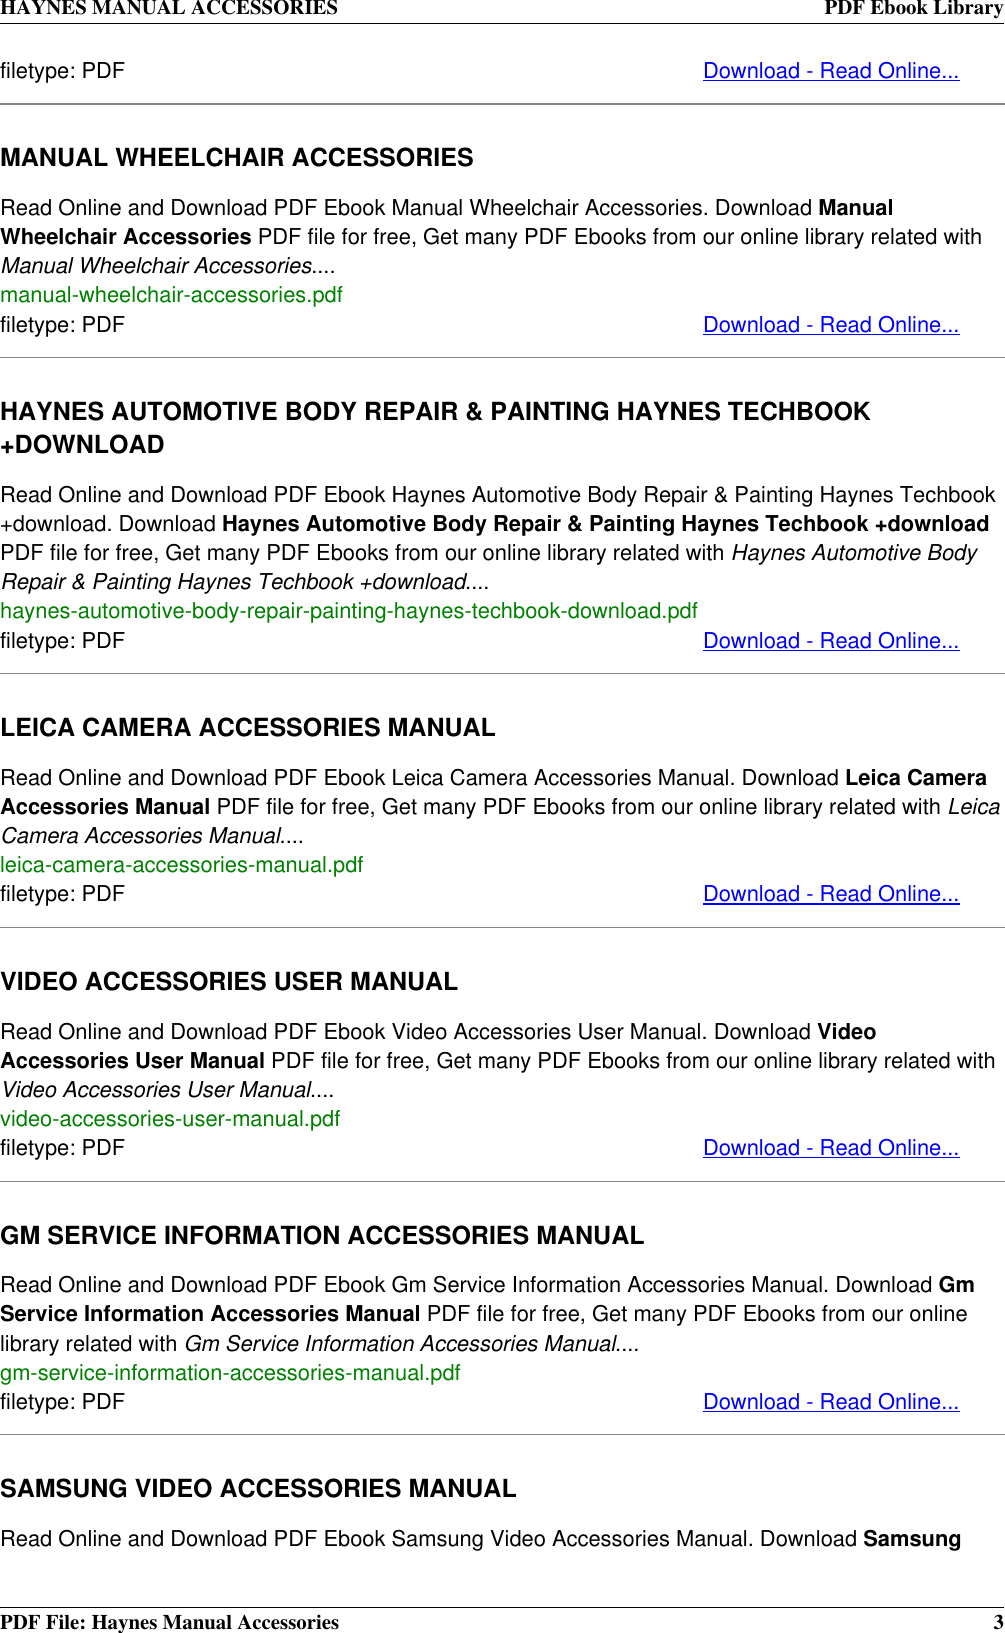 Page 3 of 4 - Haynes-Manuals Haynes-Manuals-Haynes-Manuals-Automobile-Accessories-36034-Users-Manual- HAYNES MANUAL ACCESSORIES  Haynes-manuals-haynes-manuals-automobile-accessories-36034-users-manual